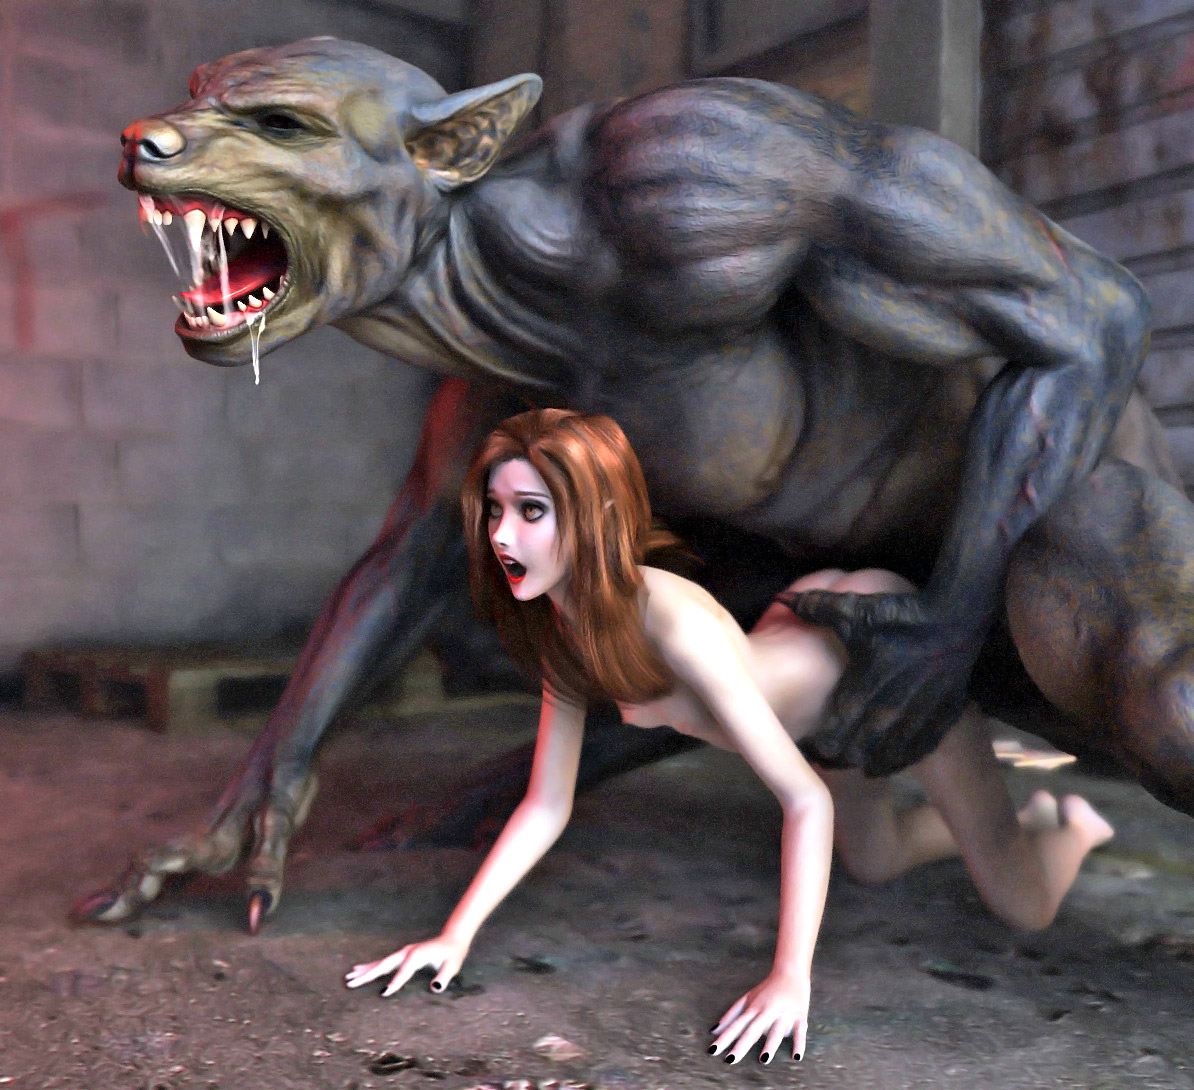 Grotesque hentai ogre porn featuring poor human girls fucked by evil ogres.  | KingdomOfEvil 3d